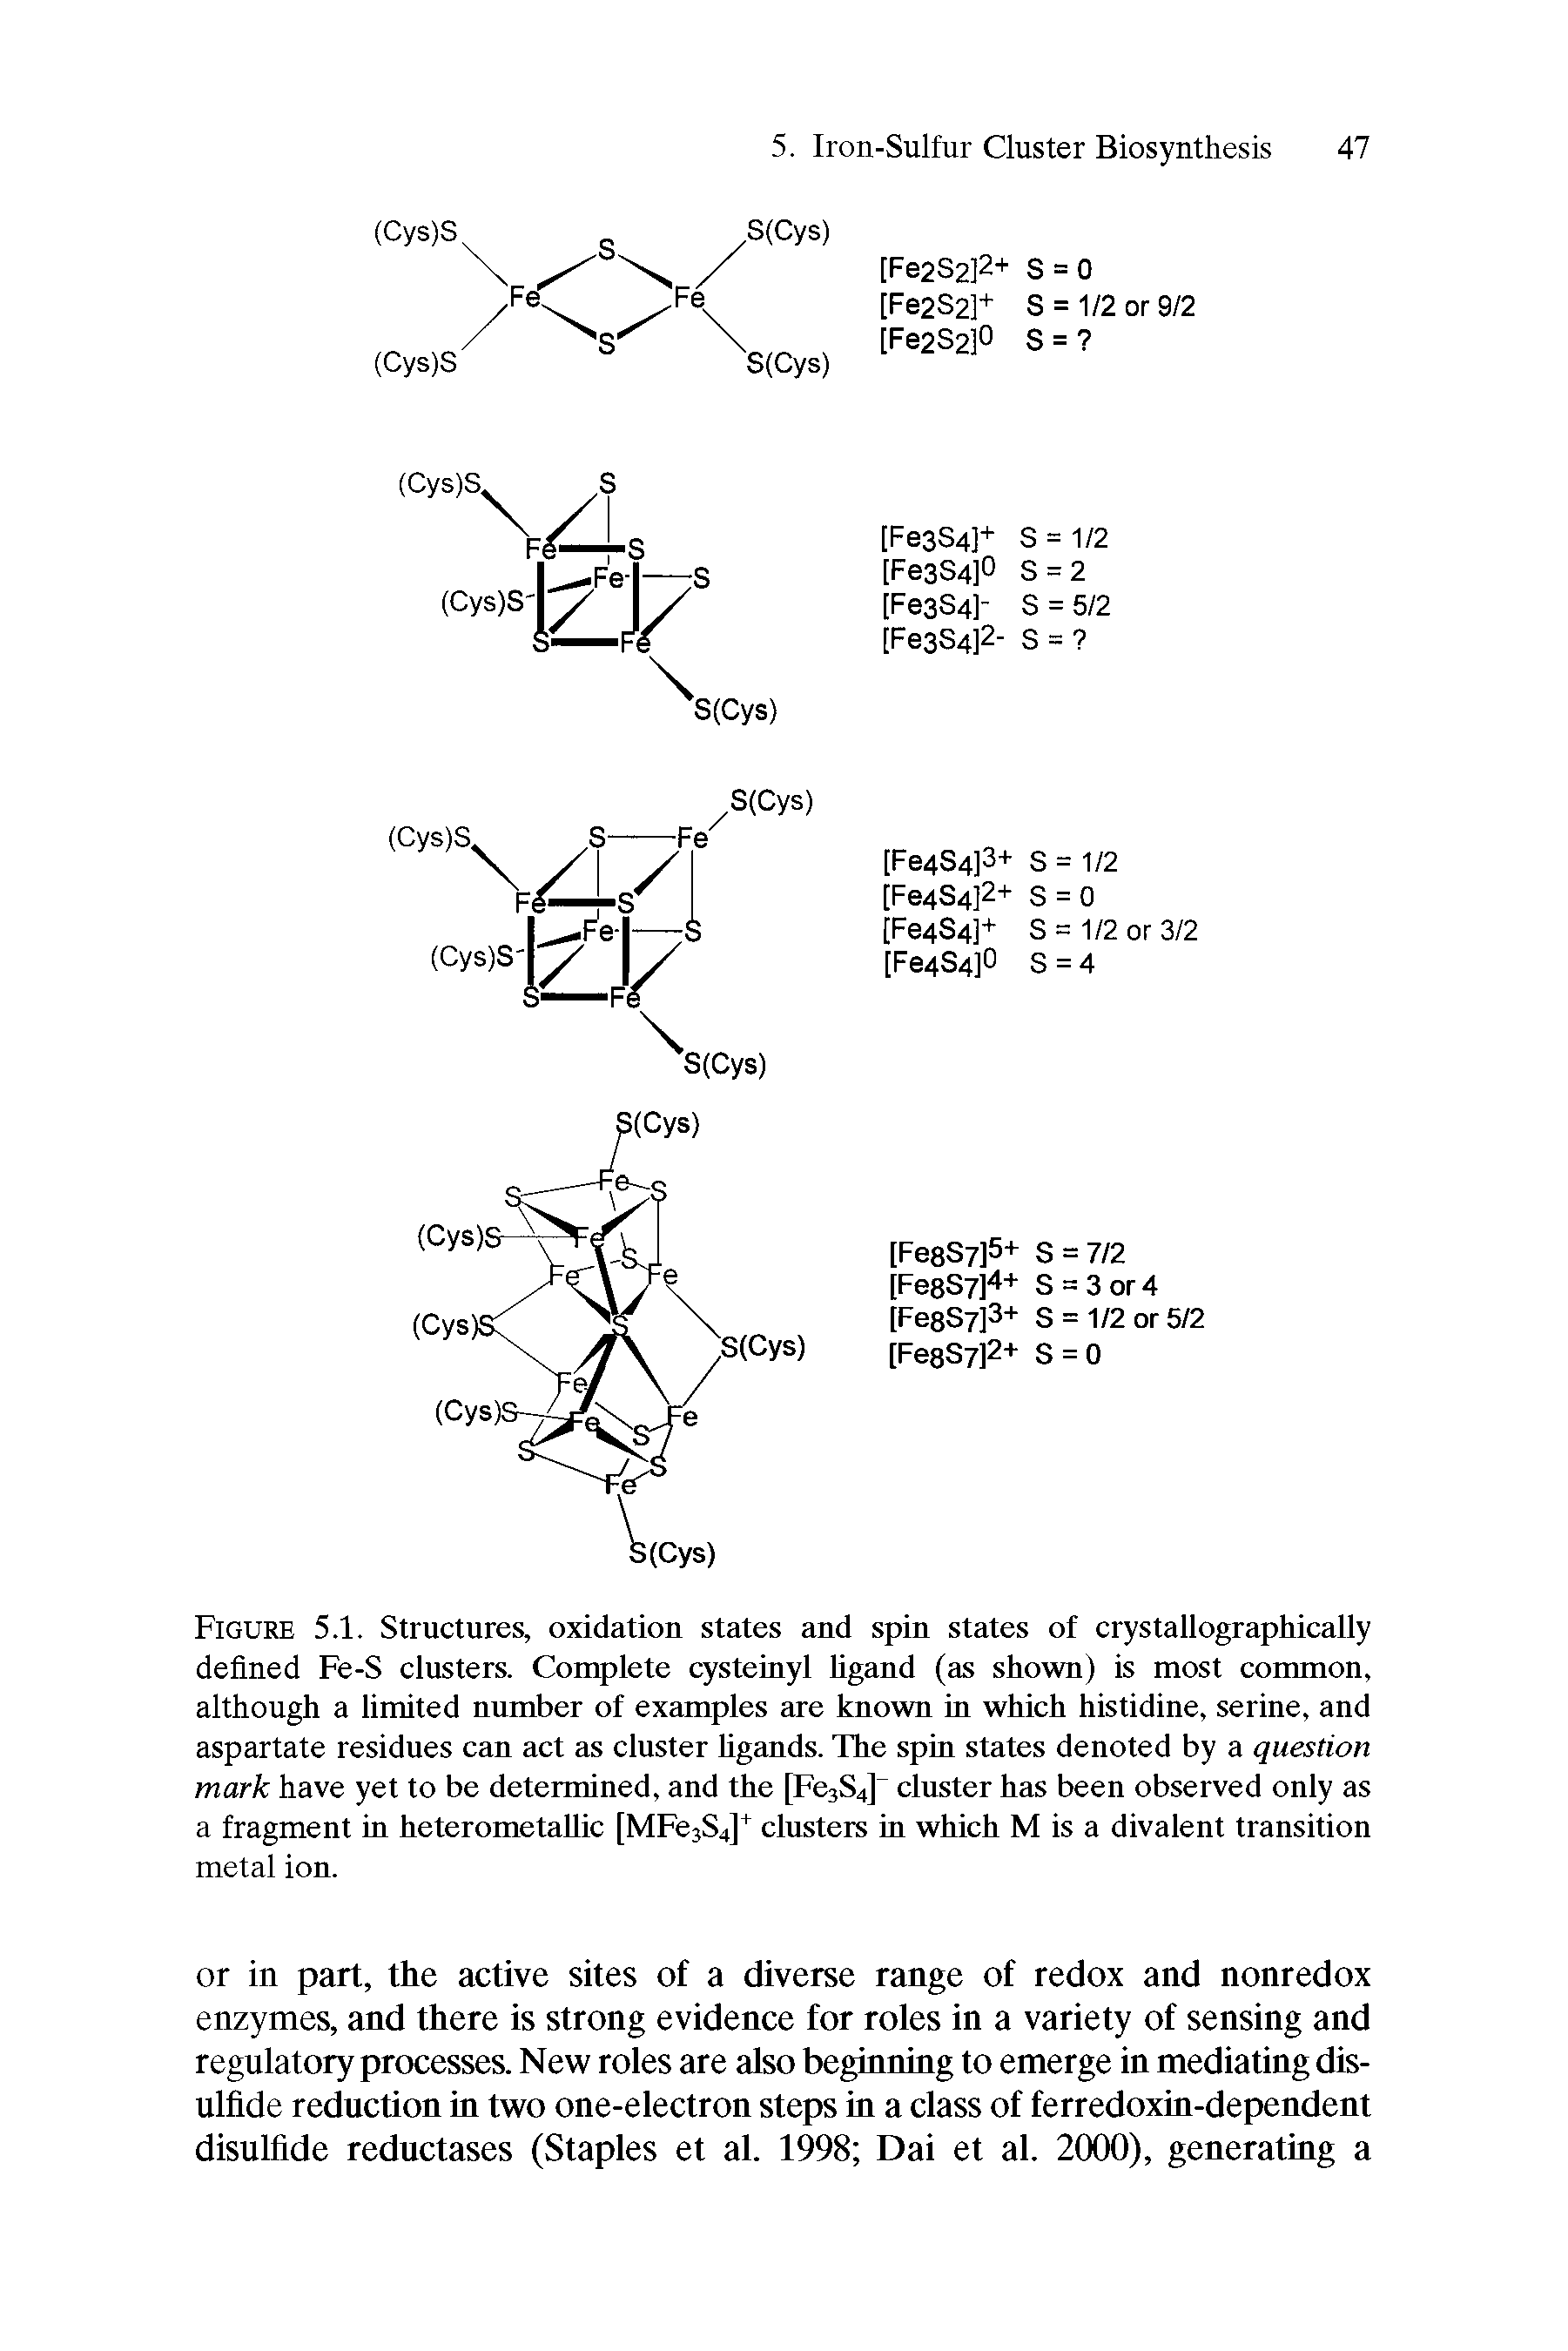 Figure 5.1. Structures, oxidation states and spin states of crystallographically defined Fe-S clusters. Complete cysteinyl ligand (as shown) is most common, although a limited number of examples are known in which histidine, serine, and aspartate residues can act as cluster ligands. The spin states denoted by a question mark have yet to be determined, and the [FesSJ cluster has been observed only as a fragment in heterometaUic [MFejSJ clusters in which M is a divalent transition metal ion.